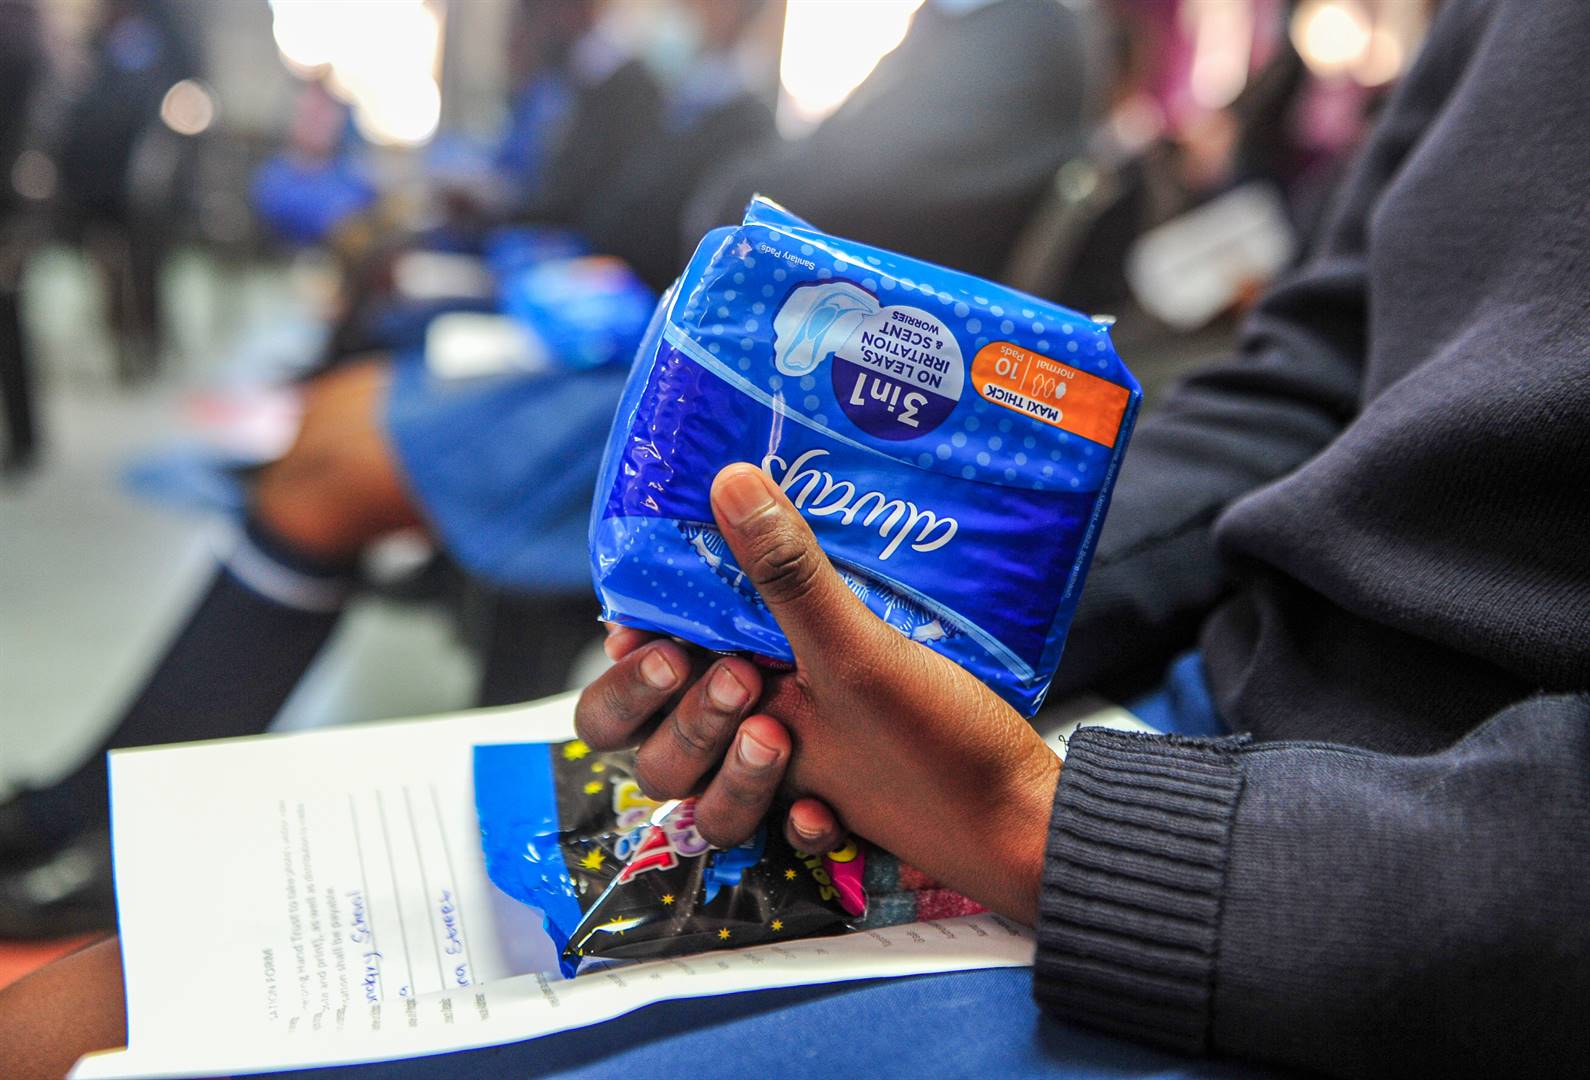 Girls on the Go, Clicks’ Helping Hand Trust programme, teamed up with the Gift of the Givers and Always to donate 1 200 packs of sanitary pads to girls at Phomolong Secondary School in Tembisa on Tuesday. Photo: Rosetta Msimango